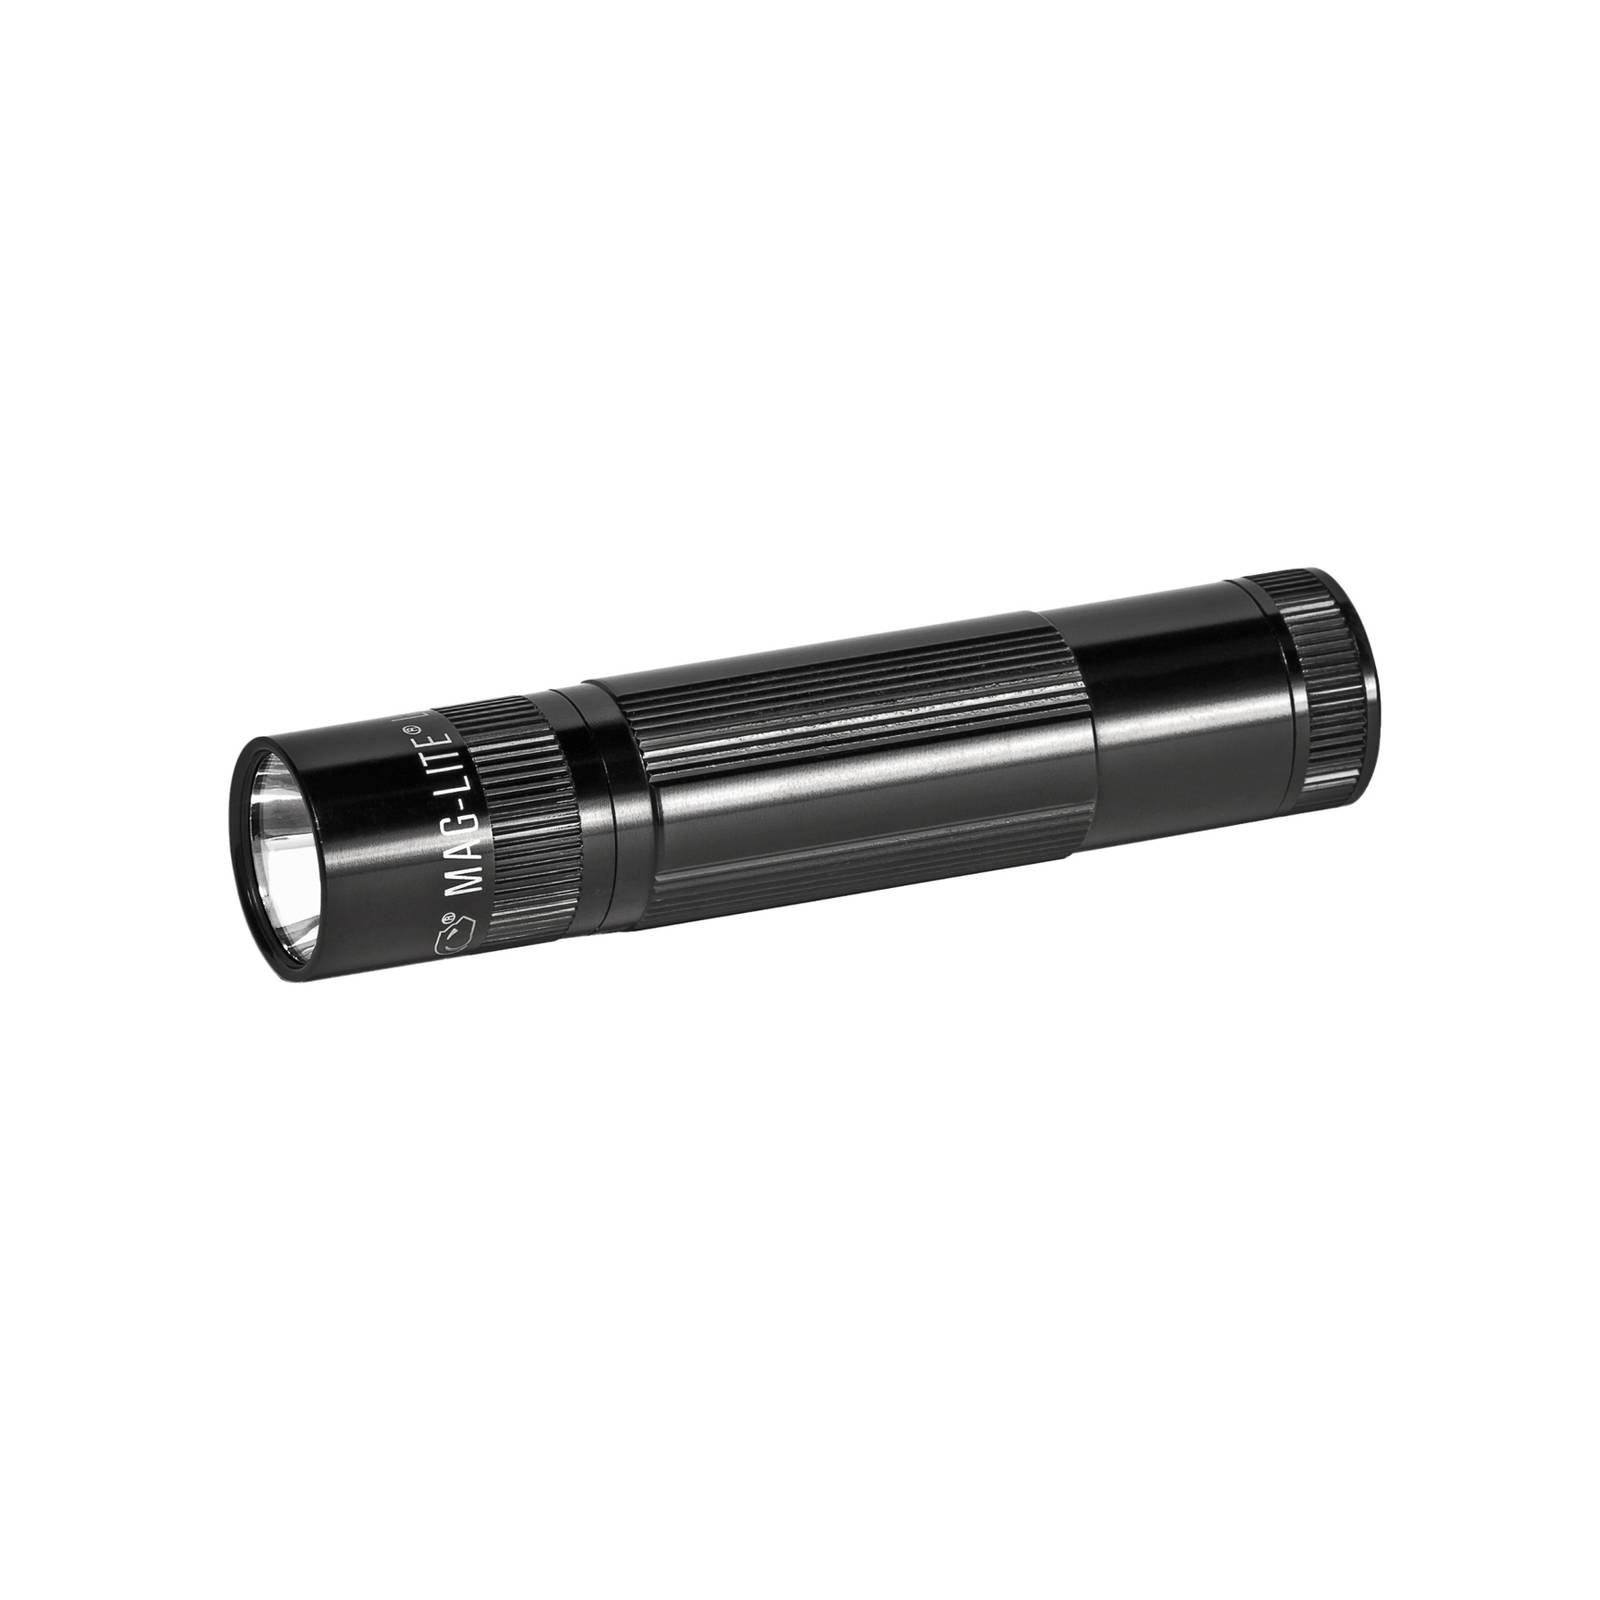 Maglite LED-lommelygte XL200 3-Cell AAA sort